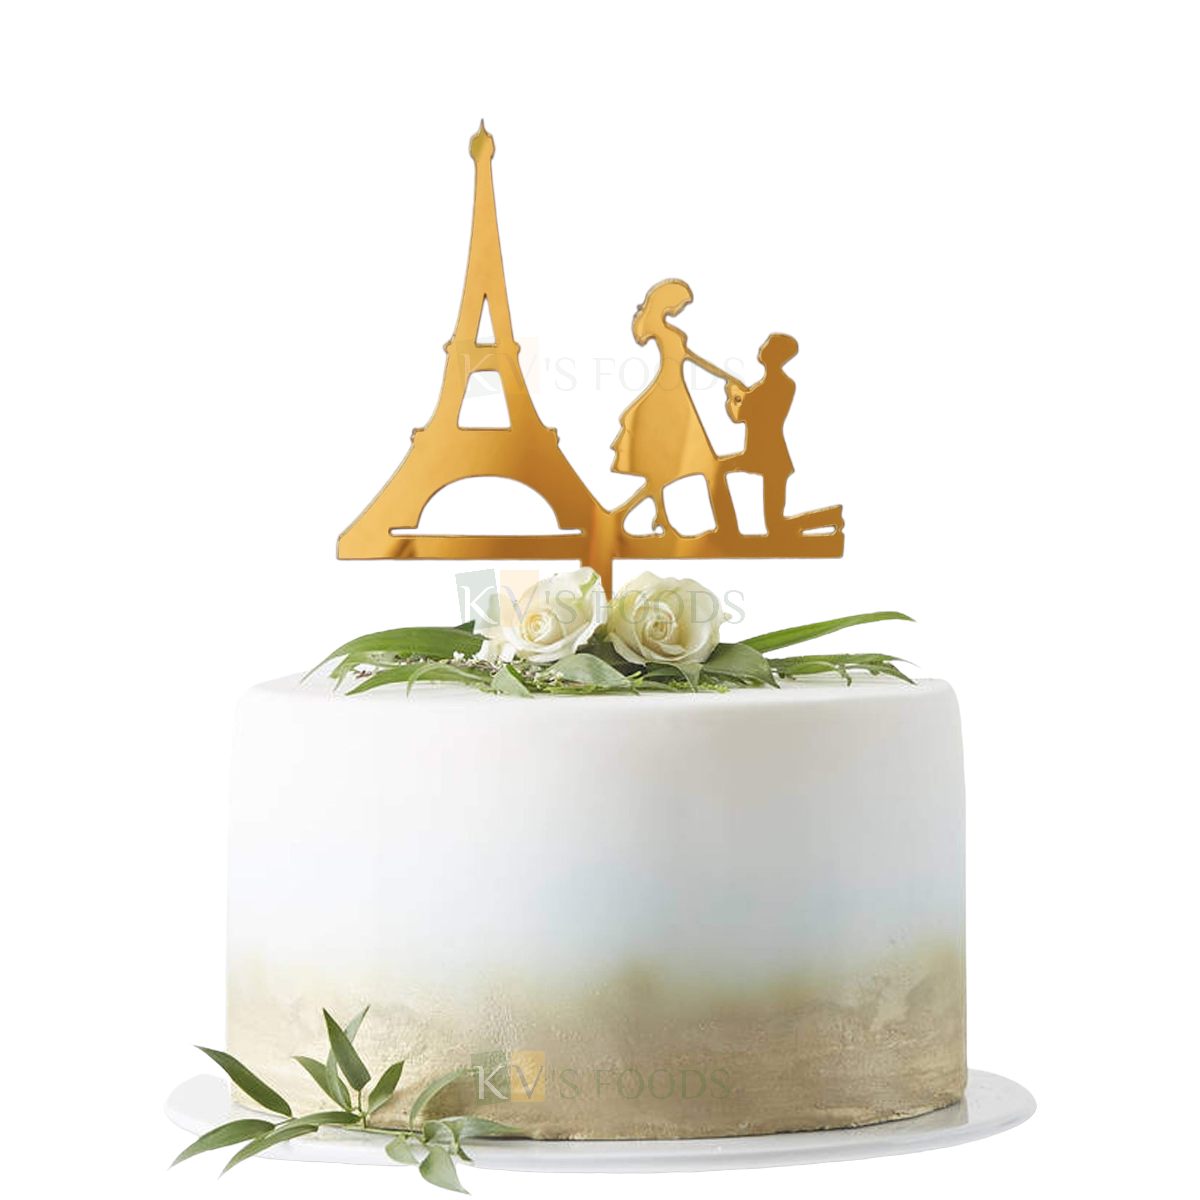 1PC Golden Acrylic Shiny Glass Finish Eiffel Tower Groom on Knee Proposing Bride Cake Topper, Marriage Anniversary Cake Topper Wedding Engagement Theme Cake Topper DIY Cake Decoration